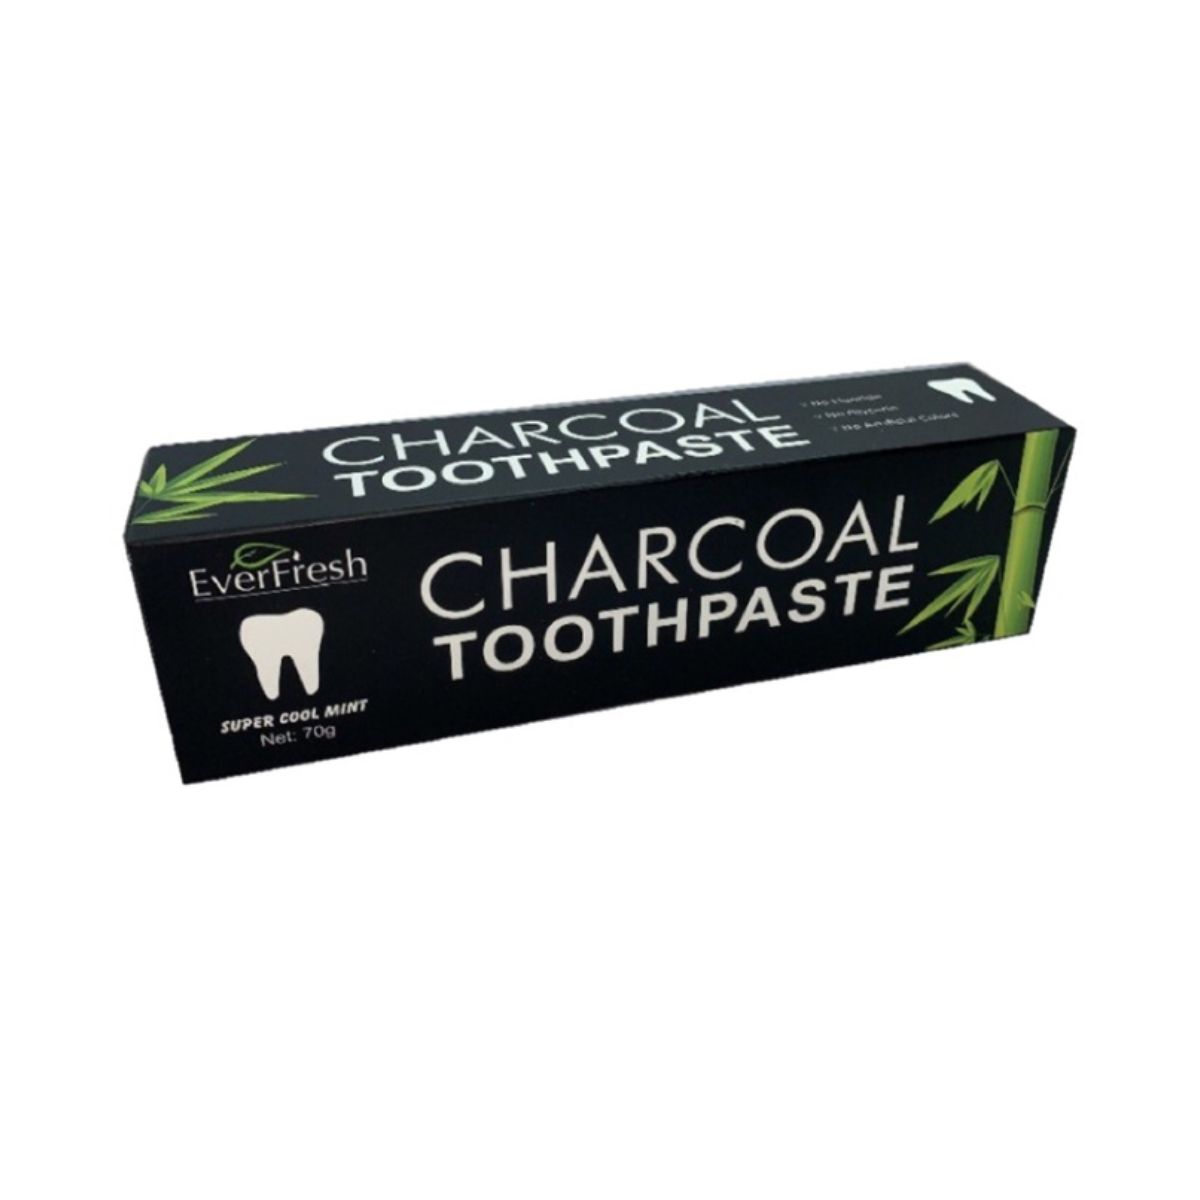 Everfresh - Charcoal Toothpaste - 70g